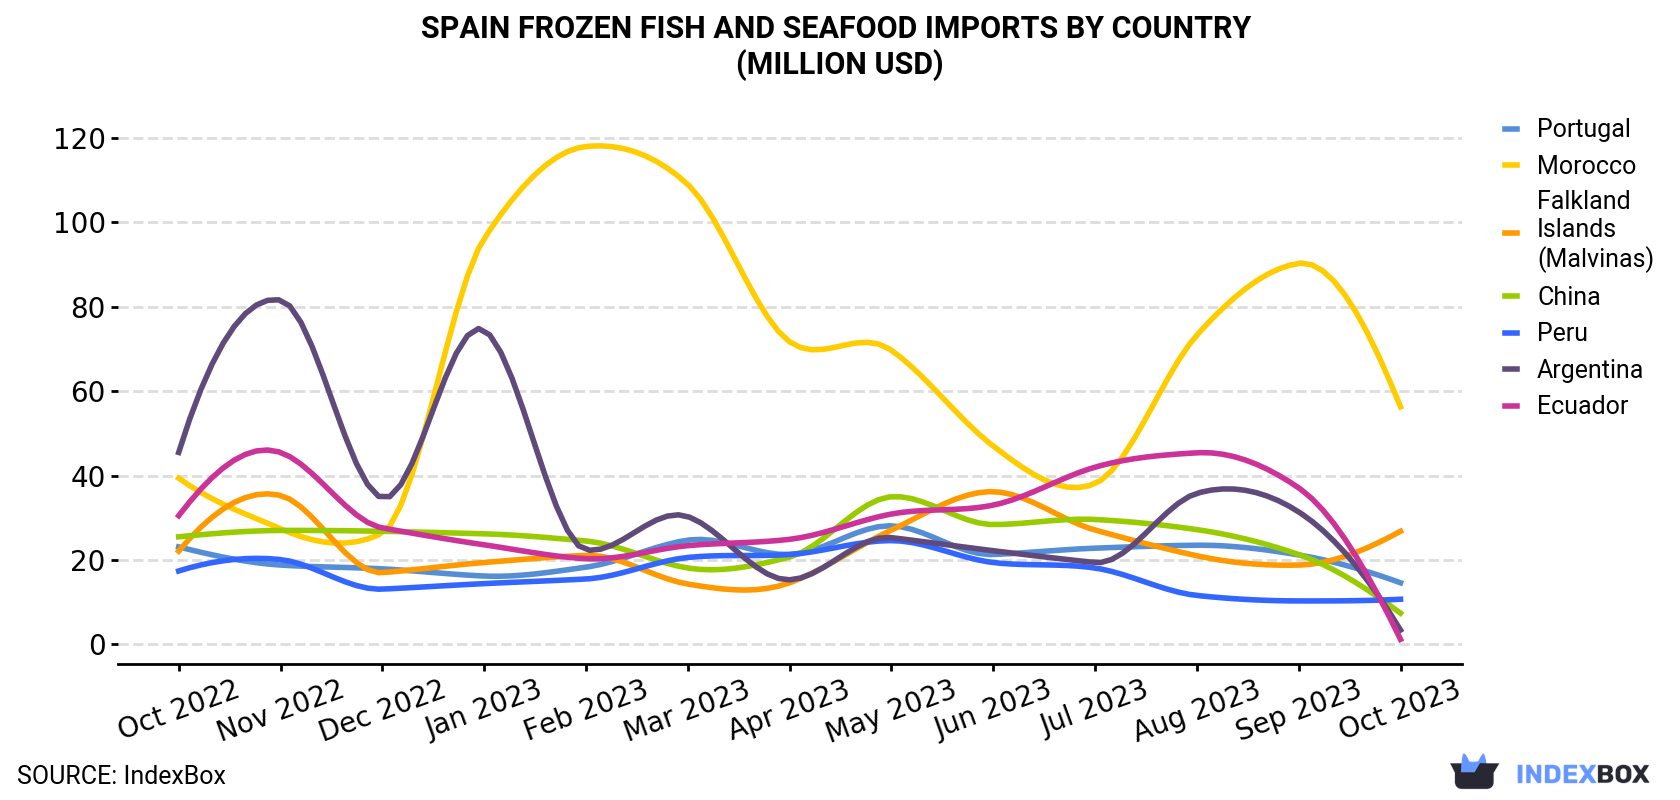 Spain Frozen Fish and Seafood Imports By Country (Million USD)